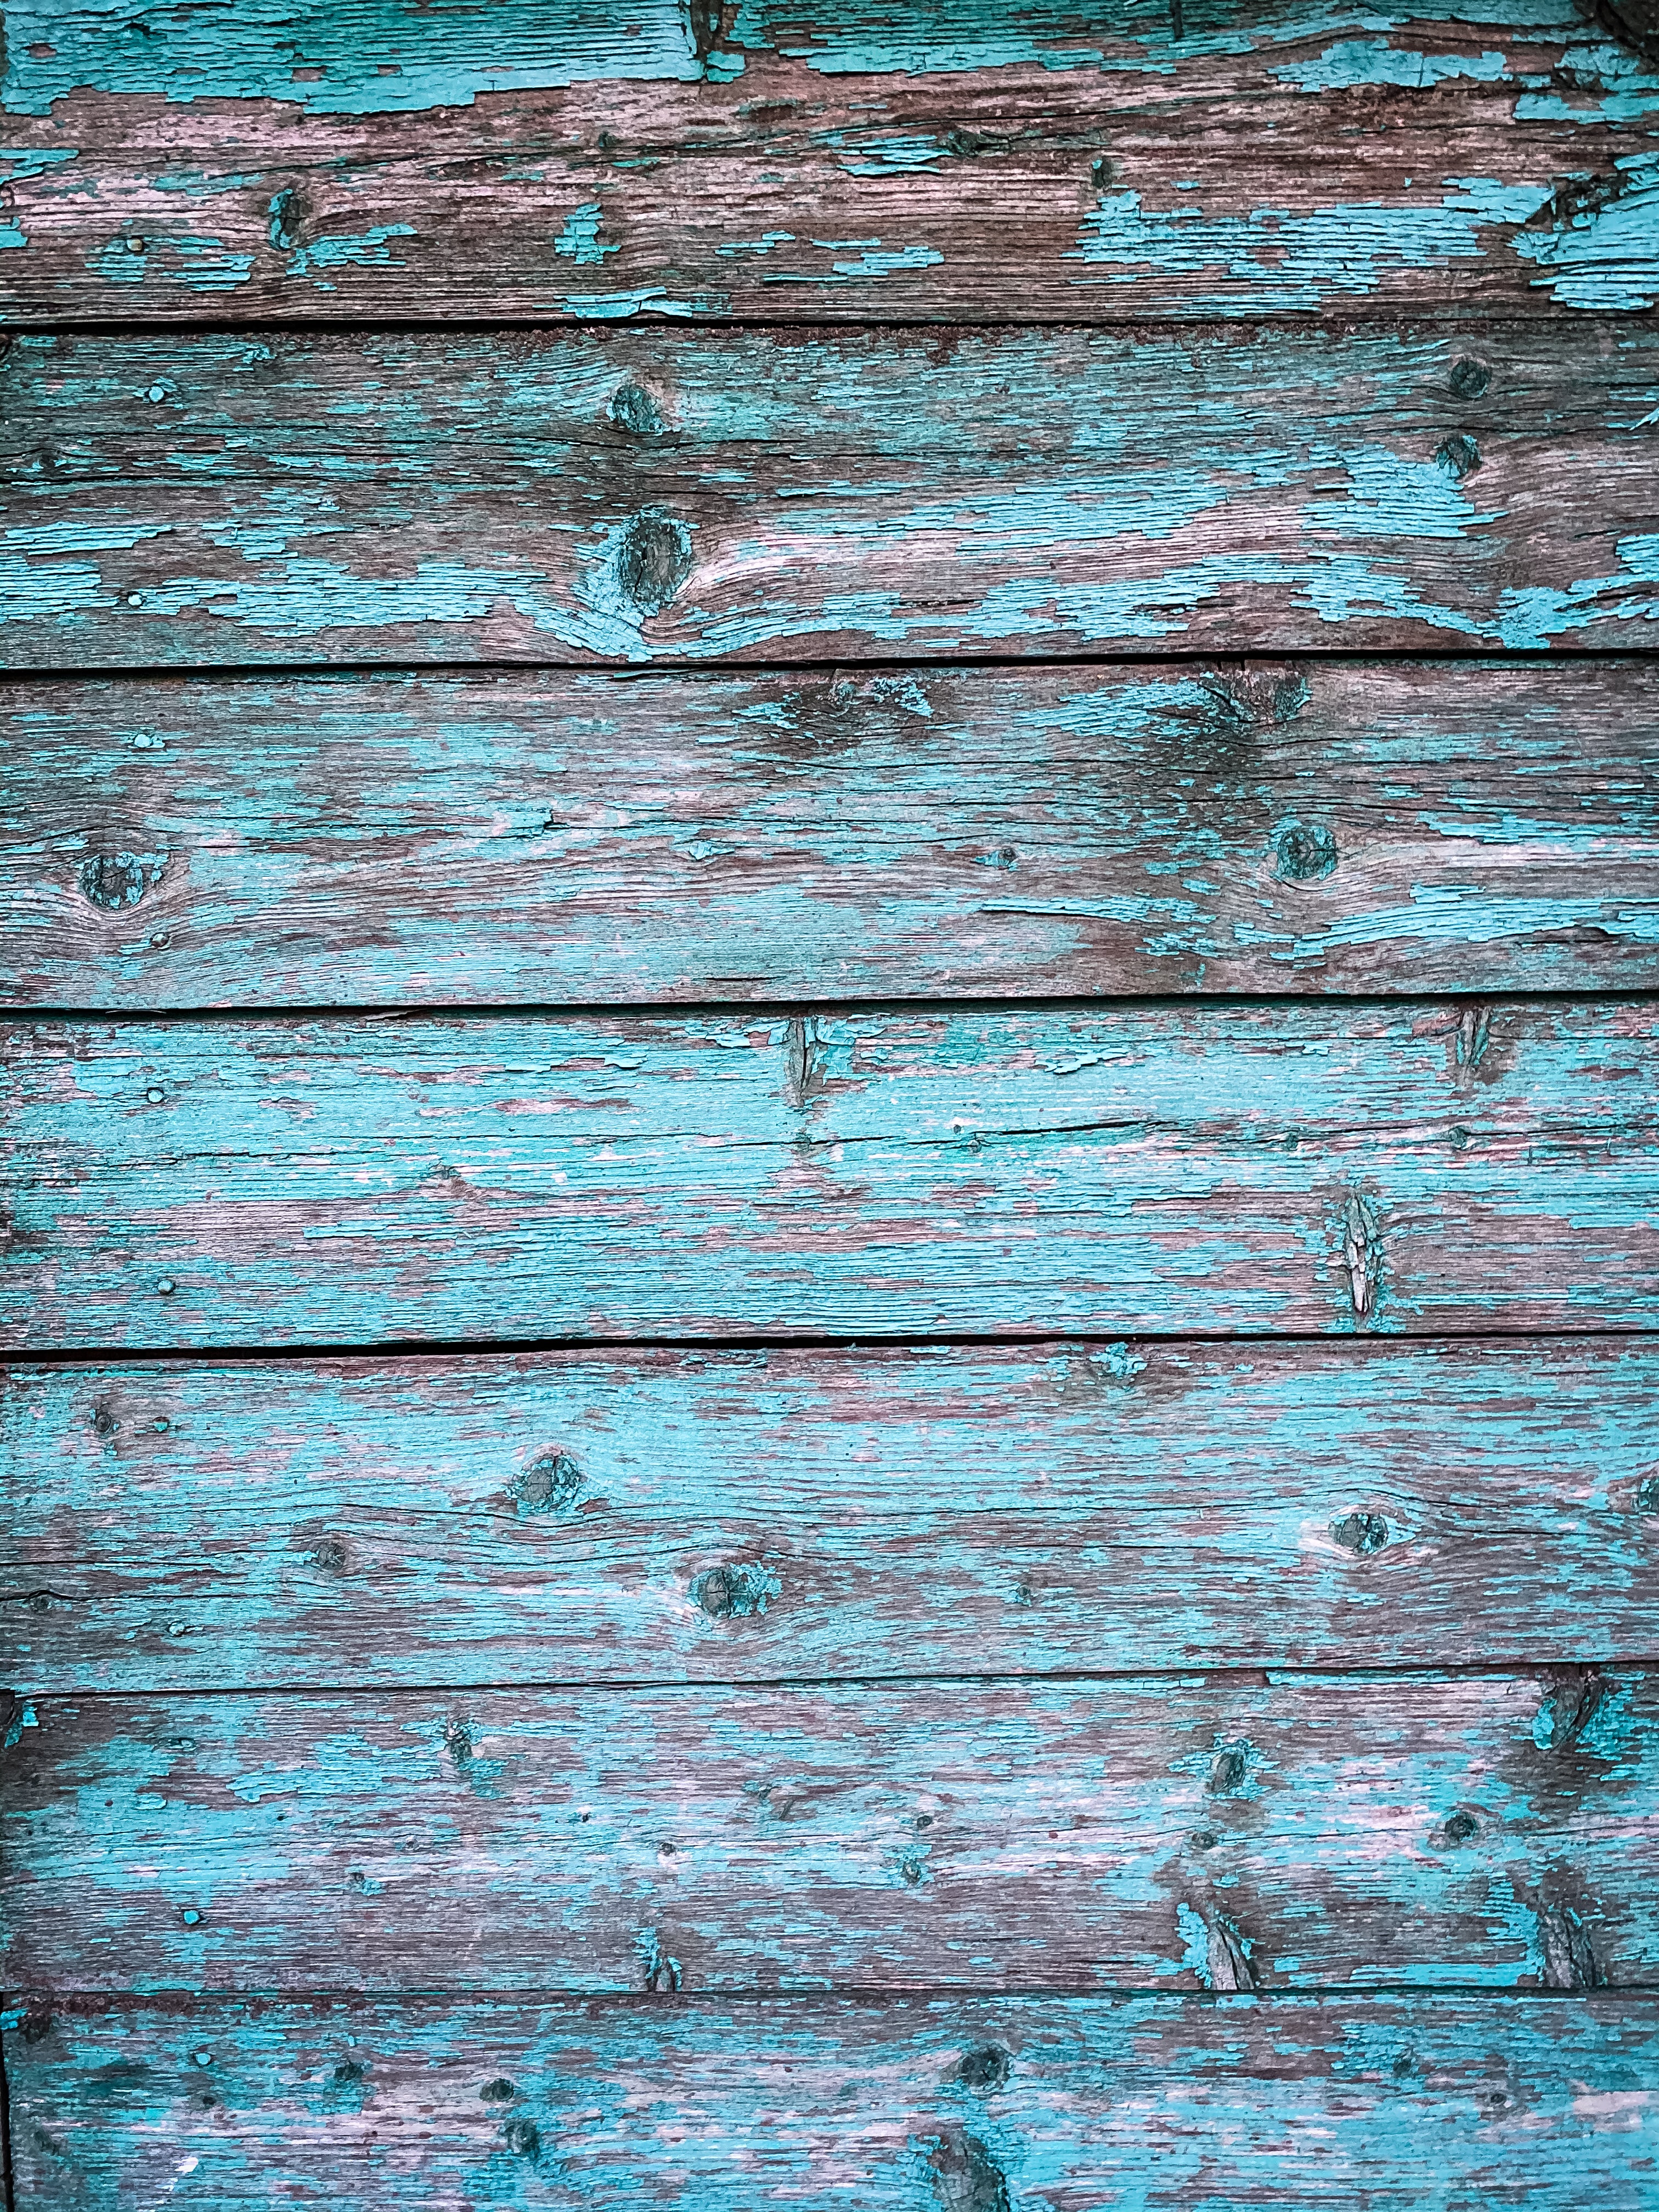 wood, wooden, texture, textures, paint, surface, old, planks, board